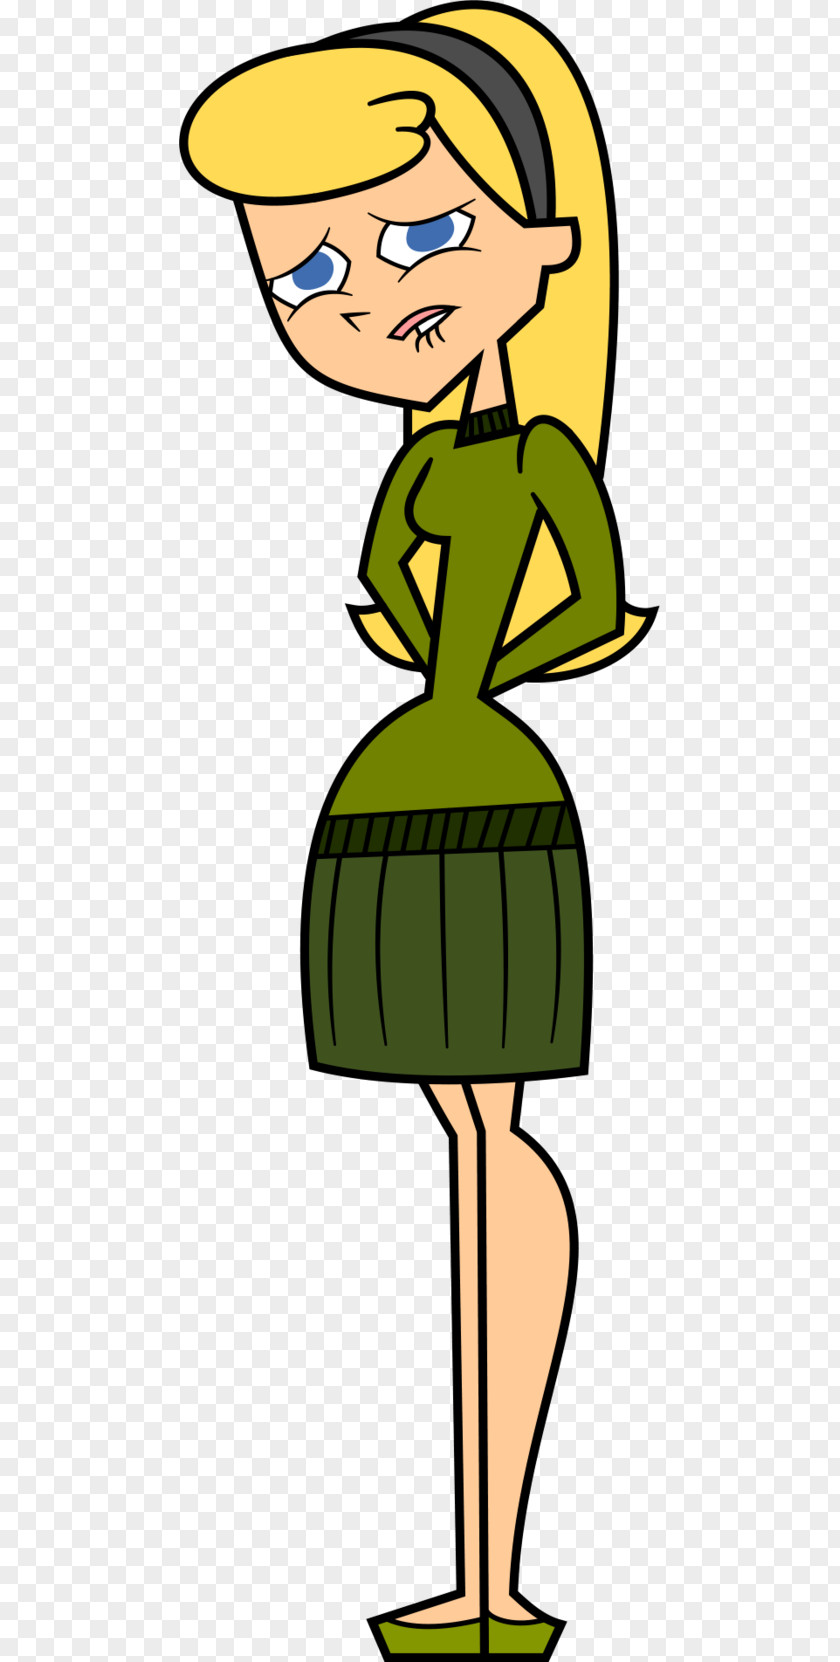 Blowing A Kiss Side Clip Art Total Drama Island Cartoon Character PNG